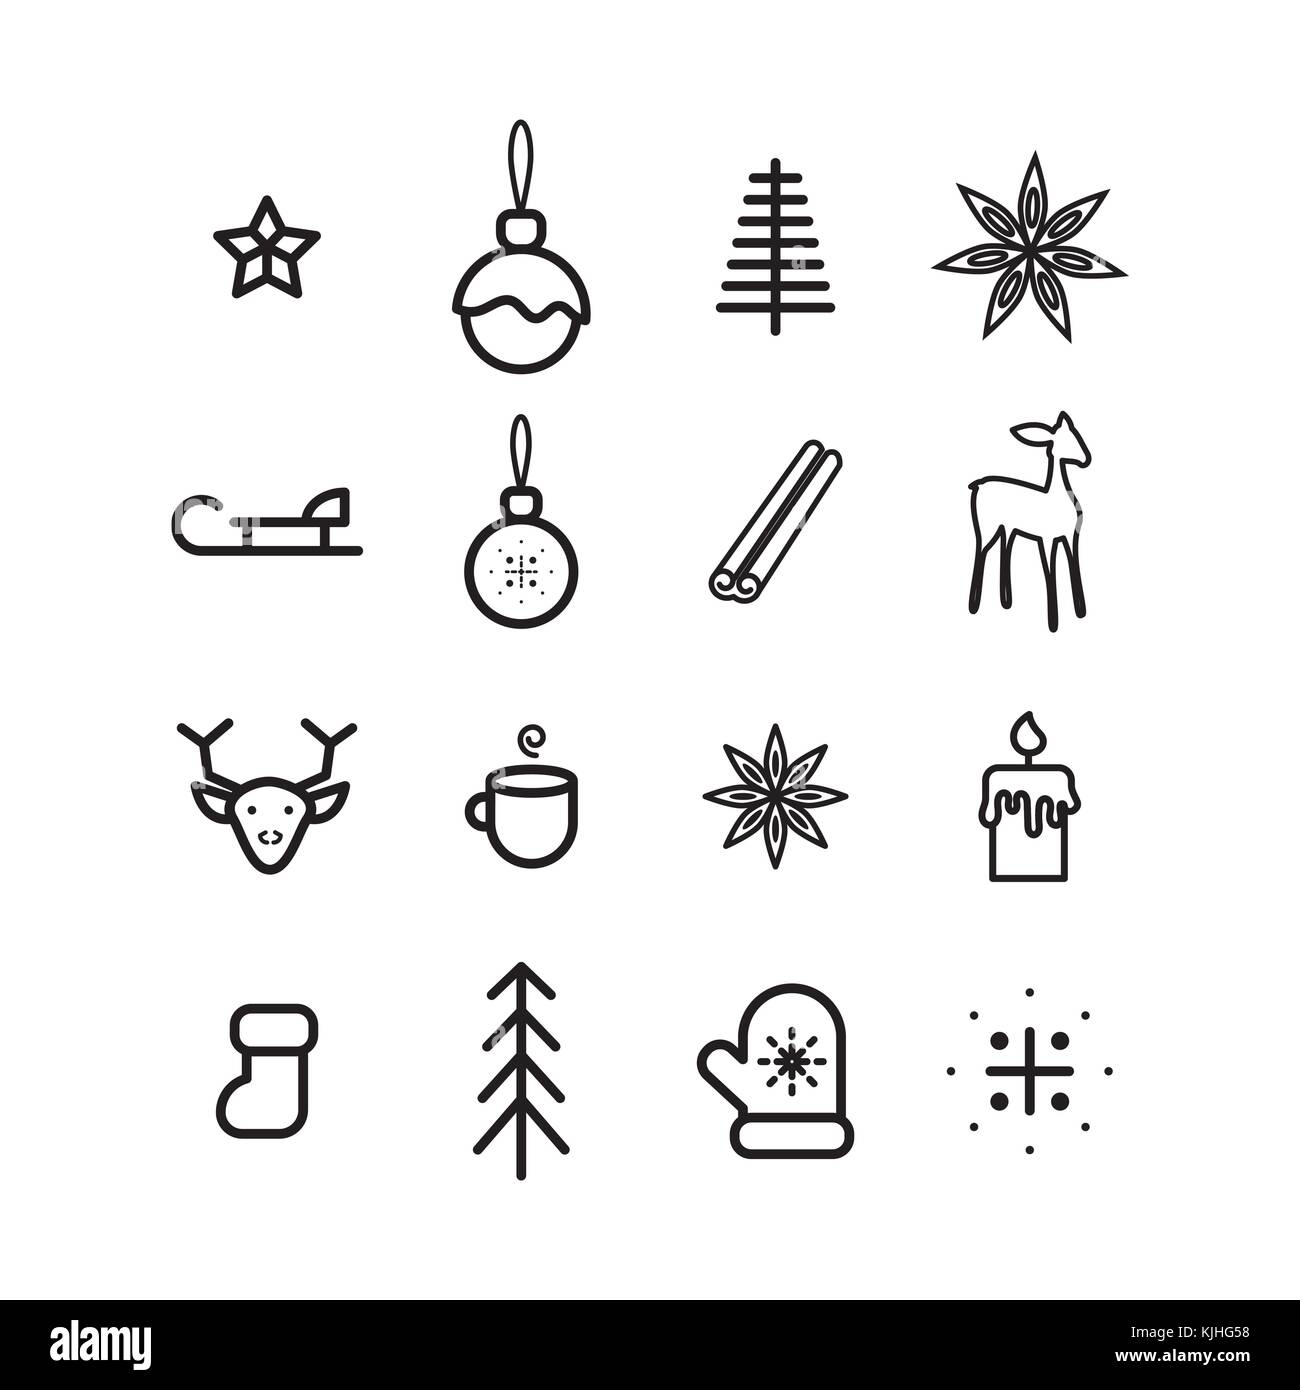 New year simple vector icon set. Stock Vector